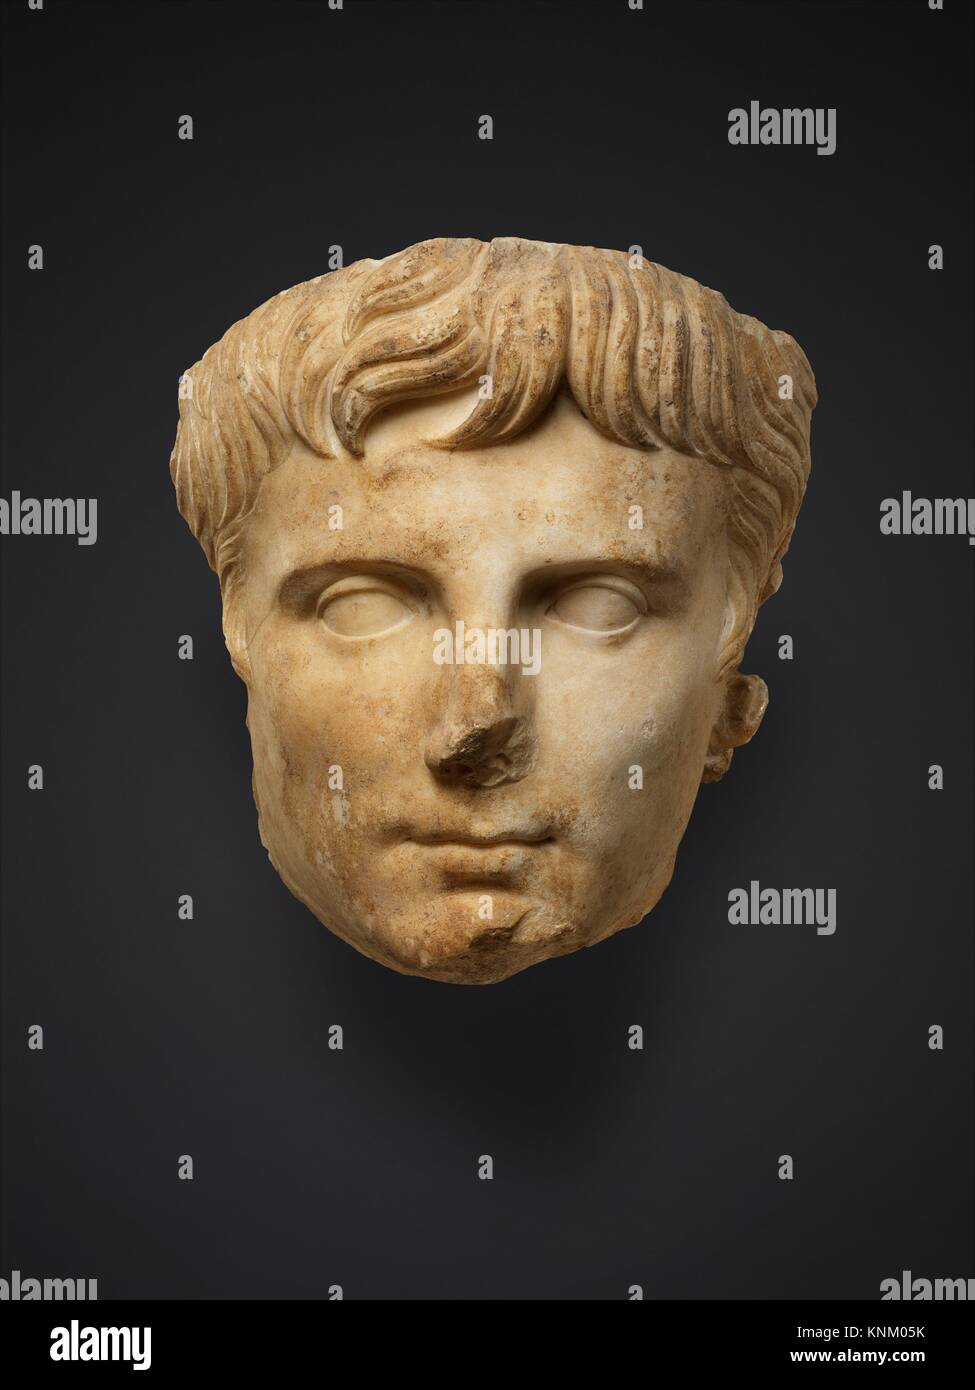 Marble portrait of the emperor Augustus. Period: Early Imperial, Julio-Claudian; Date: ca. A.D. 14-37; Culture: Roman; Medium: Marble; Dimensions: Stock Photo